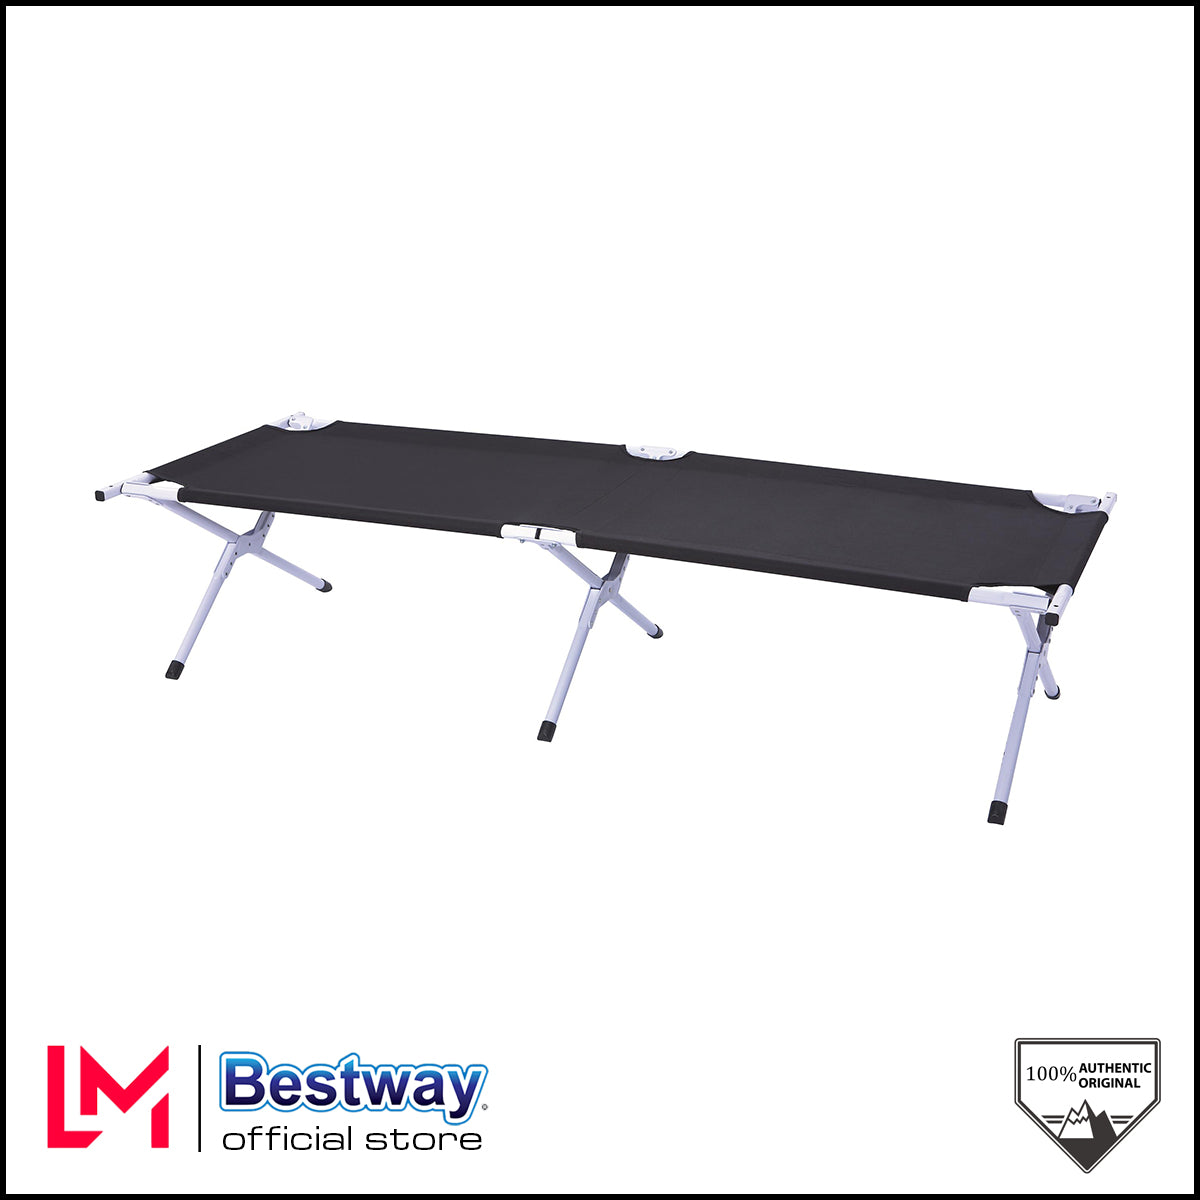 Bestway Fold N' Rest Camping Bed